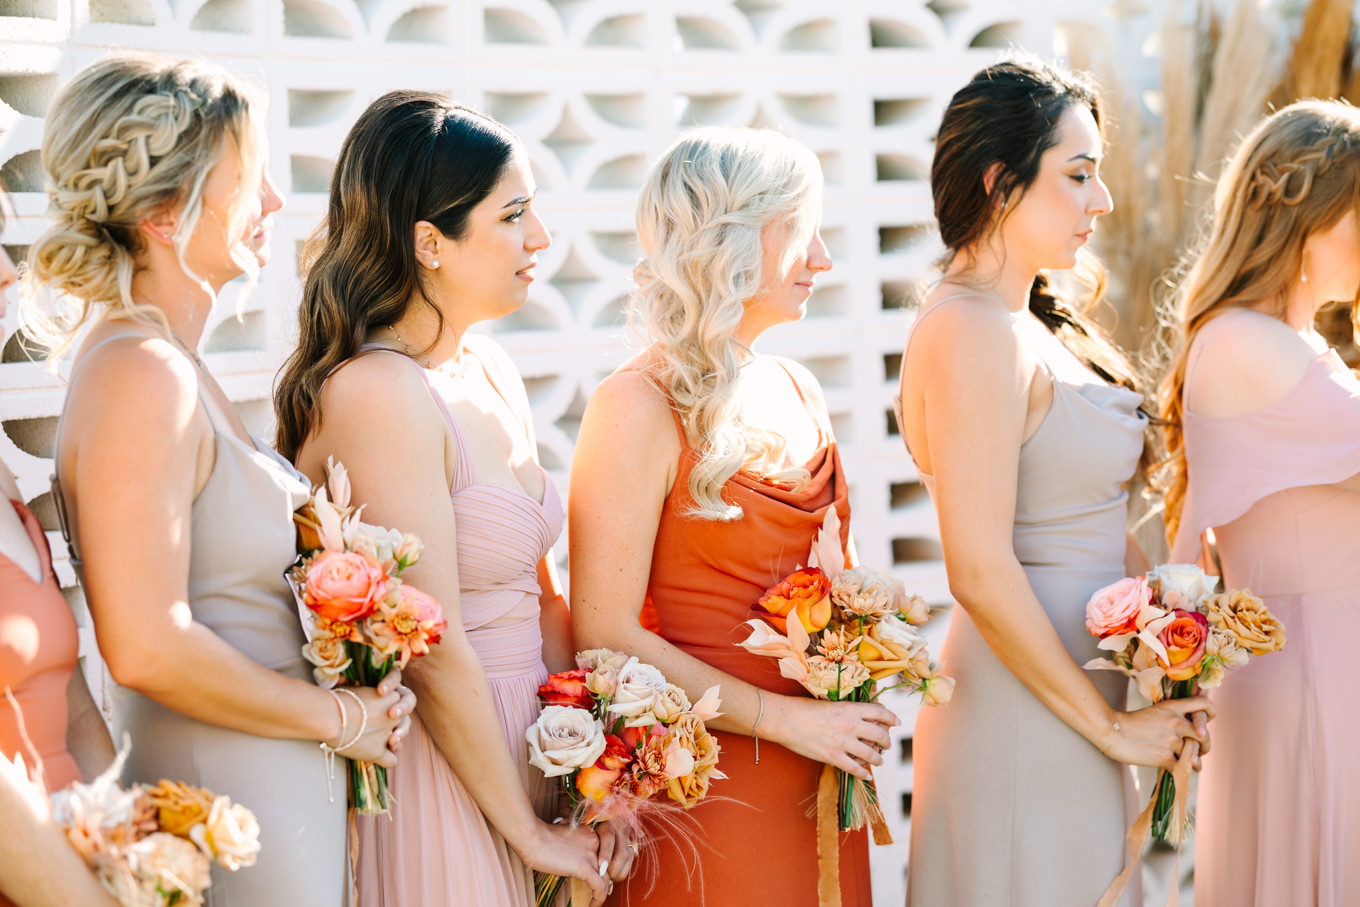 Bridesmaids at wedding ceremony | Pink and orange Lautner Compound wedding | Colorful Palm Springs wedding photography | #palmspringsphotographer #palmspringswedding #lautnercompound #southerncaliforniawedding  Source: Mary Costa Photography | Los Angeles